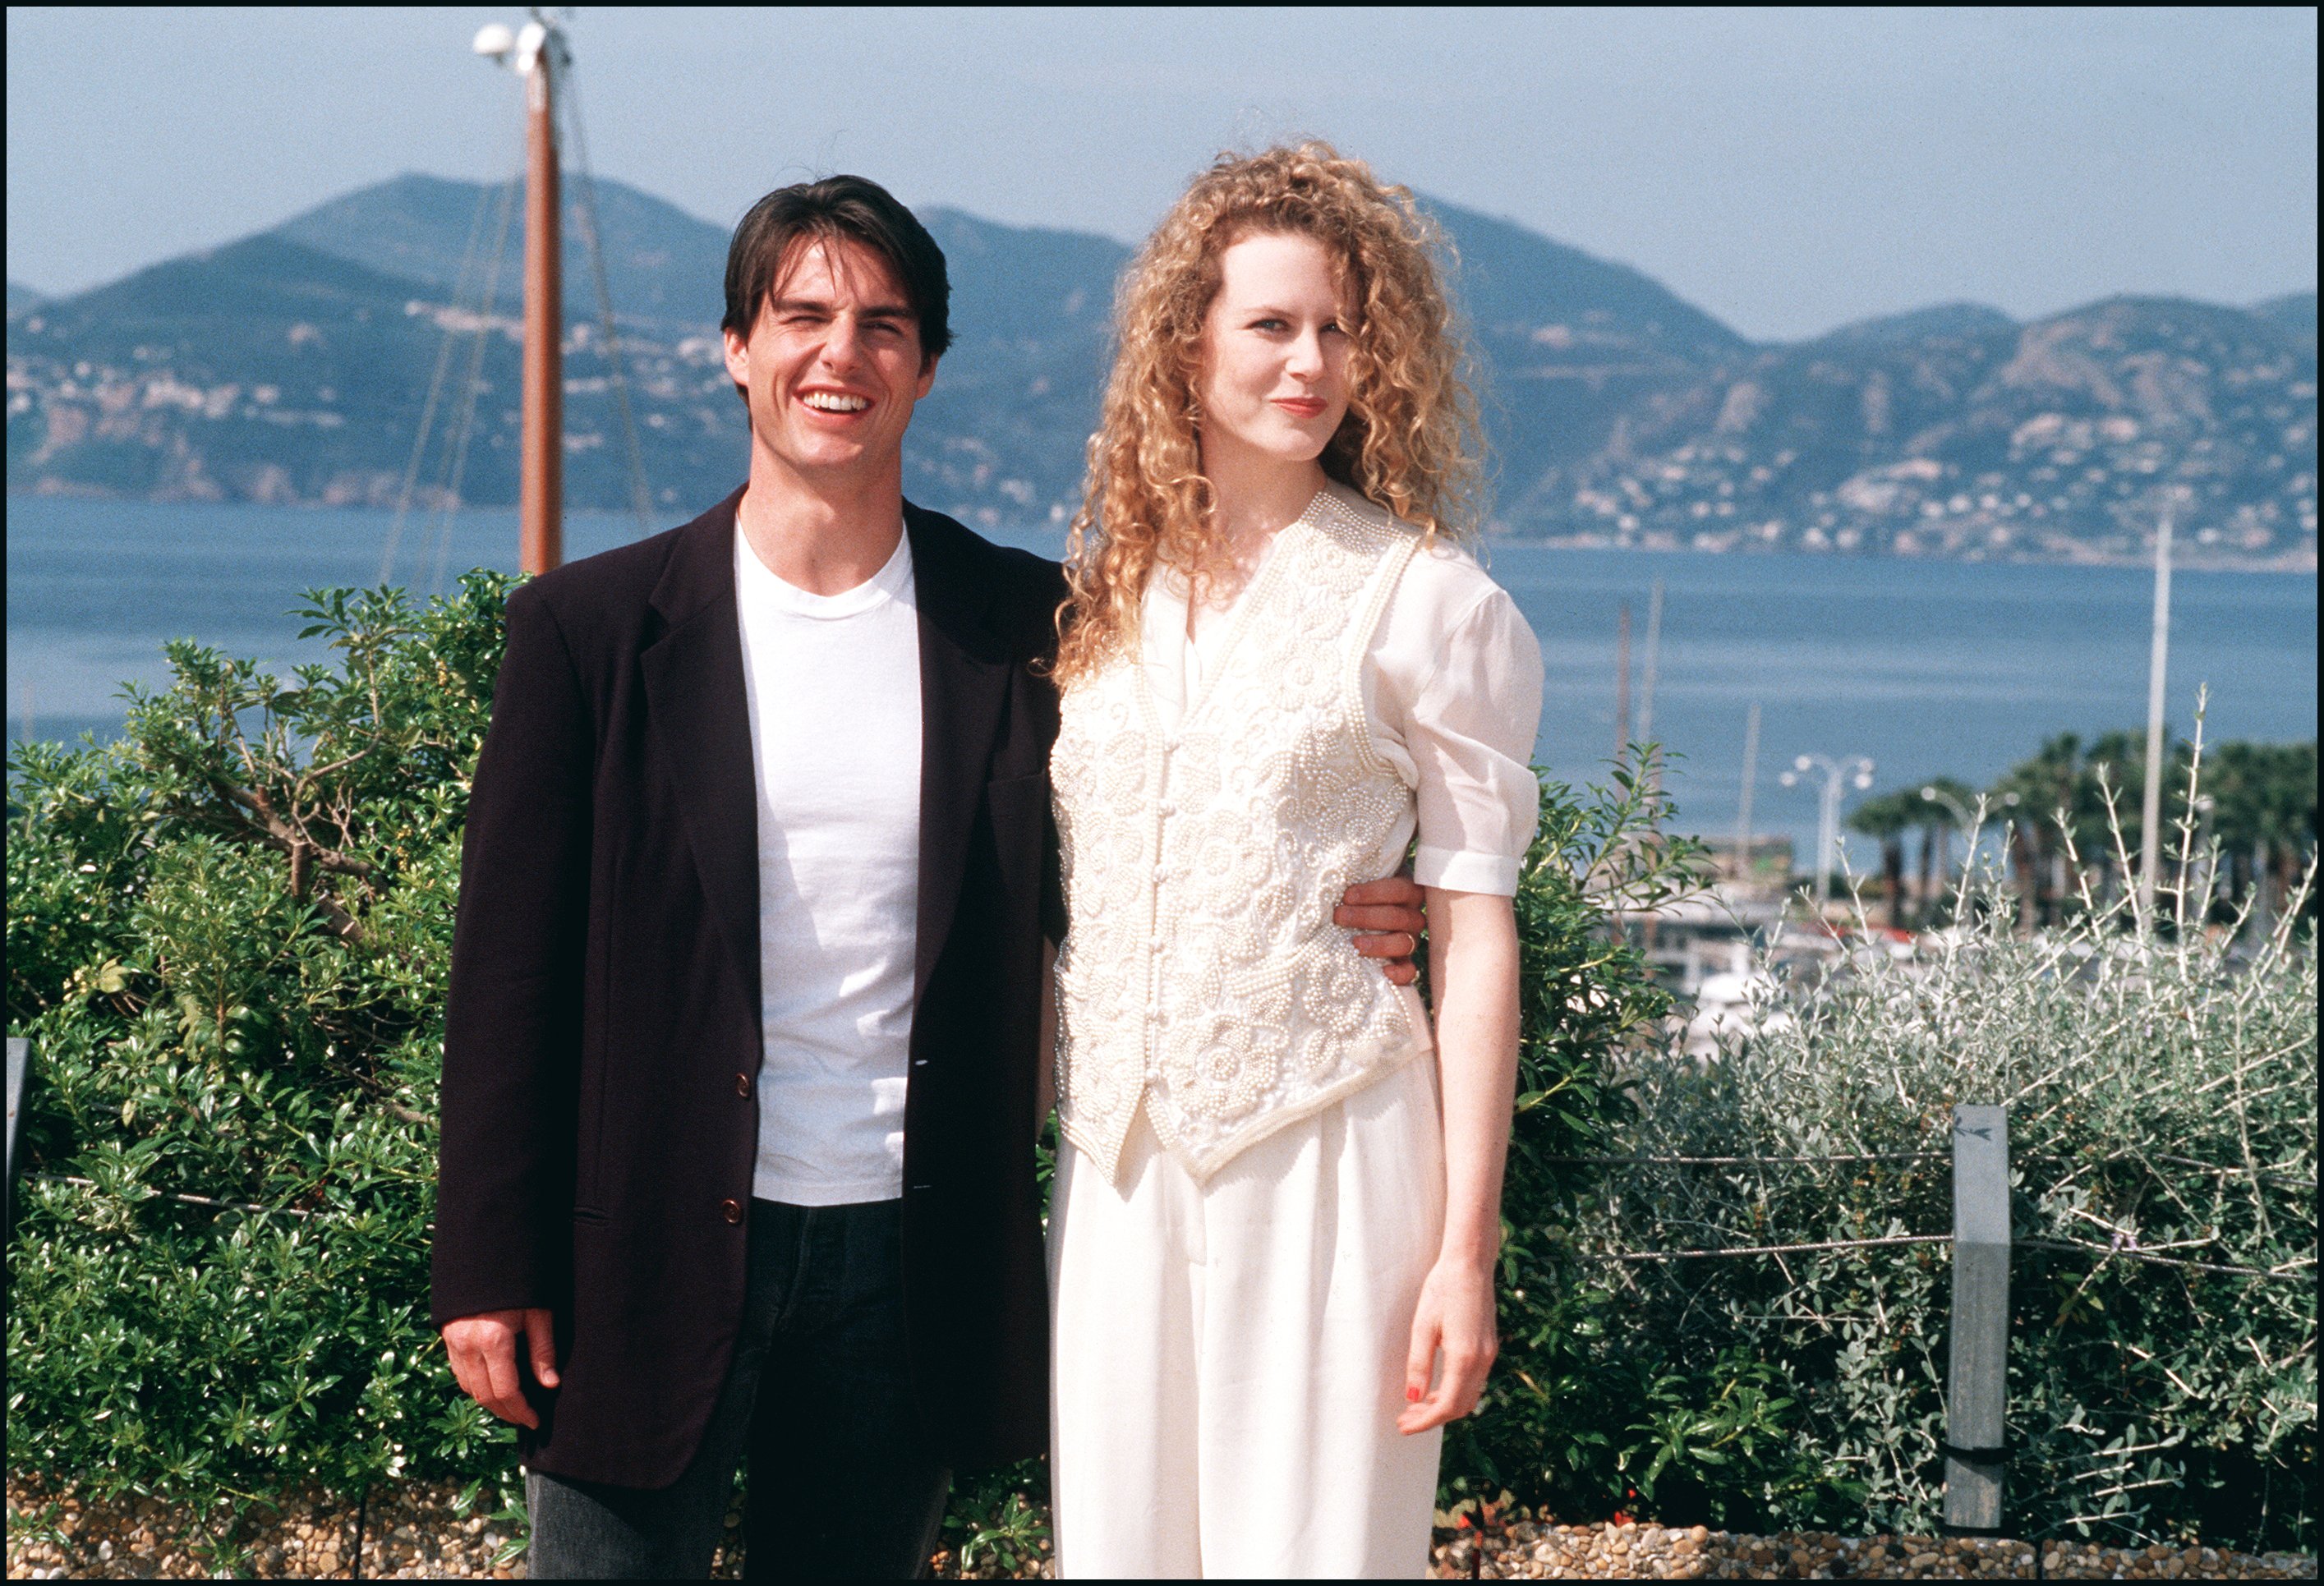 Cannes Film festival in Cannes, France on May 17, 1992-Tom Cruise and Nicole Kidman | Source: Getty Images